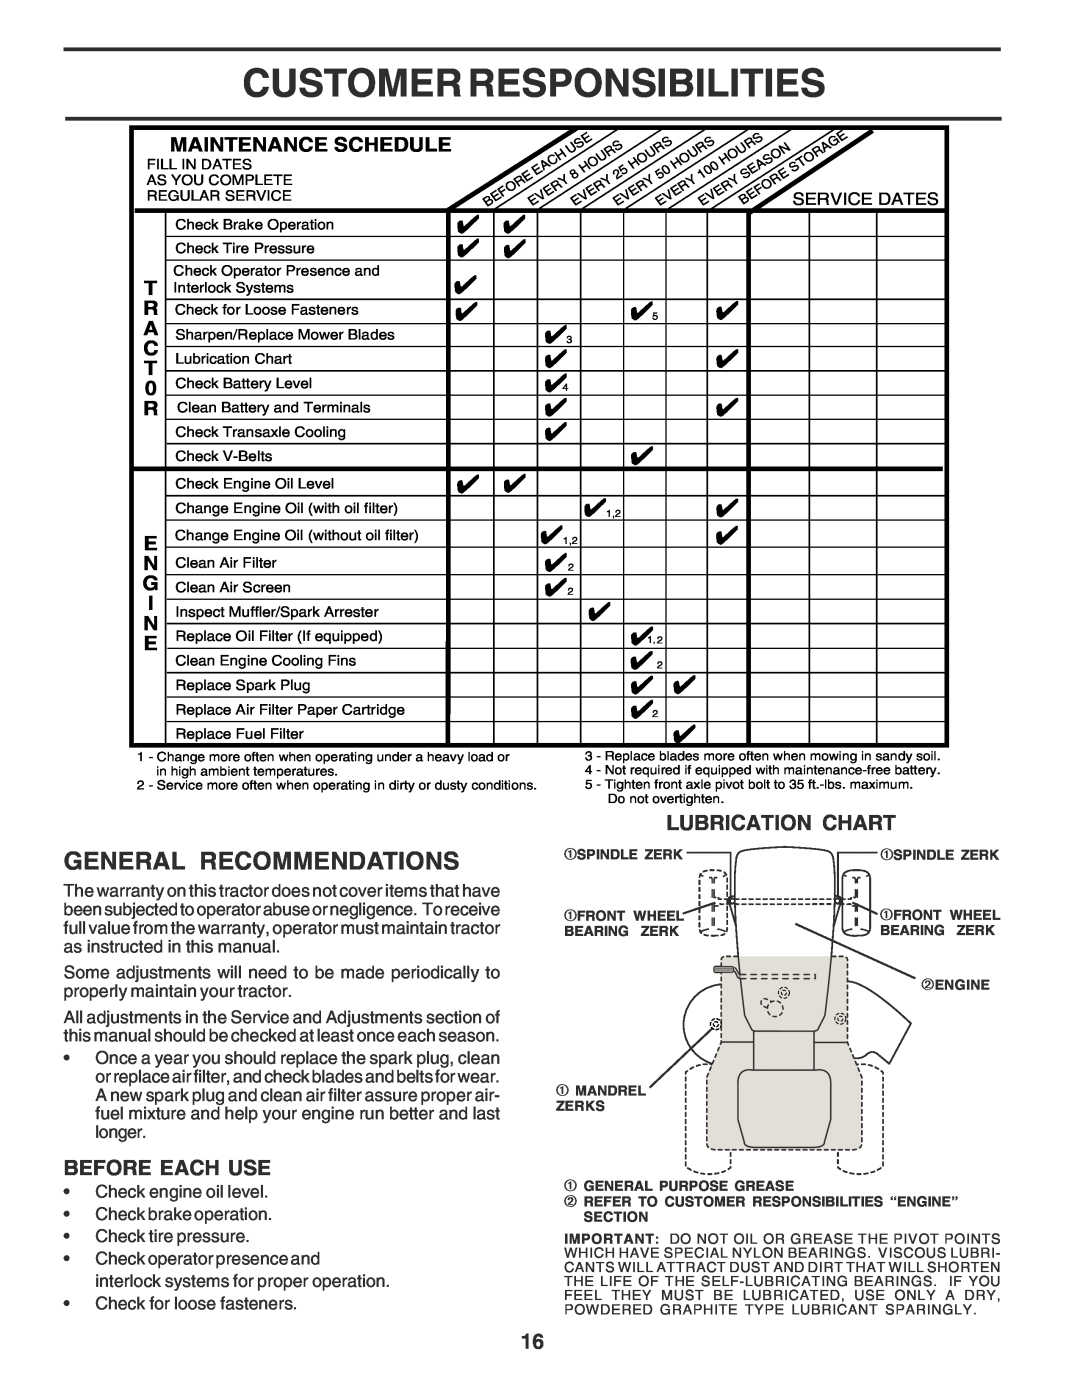 Poulan 183050 Customer Responsibilities, General Recommendations, Lubrication Chart, Before Each Use, Maintenance Schedule 